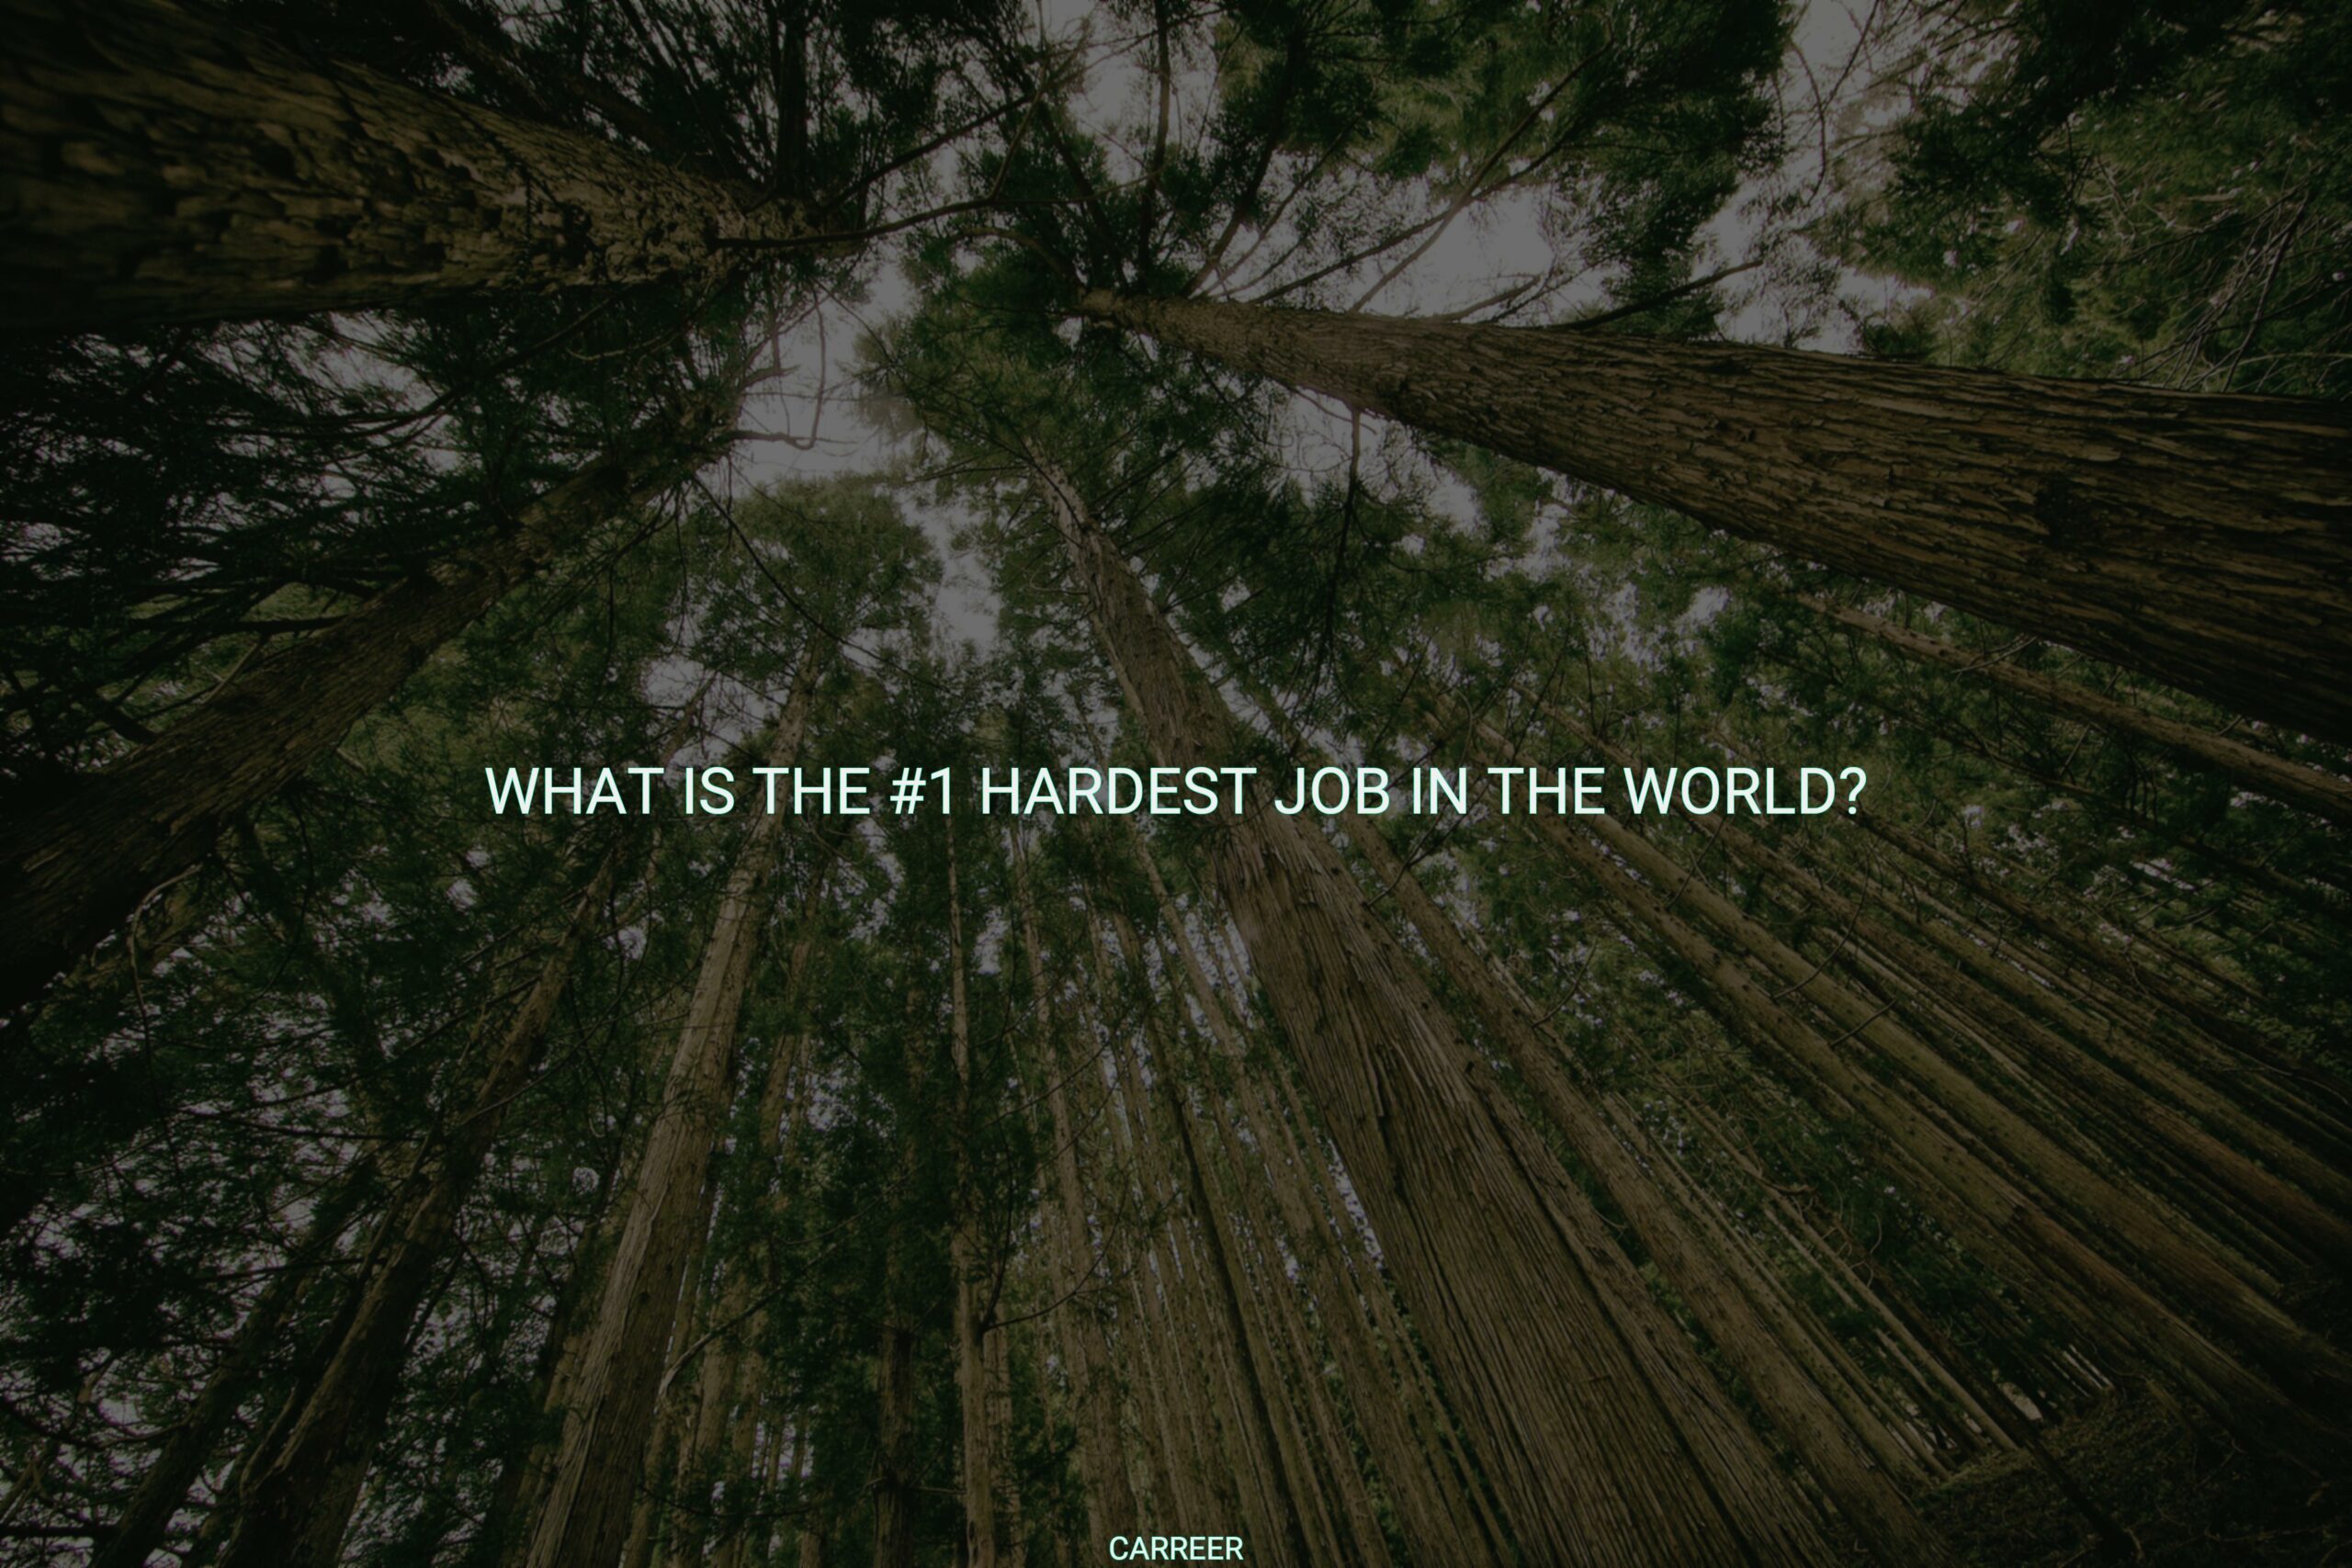 What is the #1 hardest job in the world?